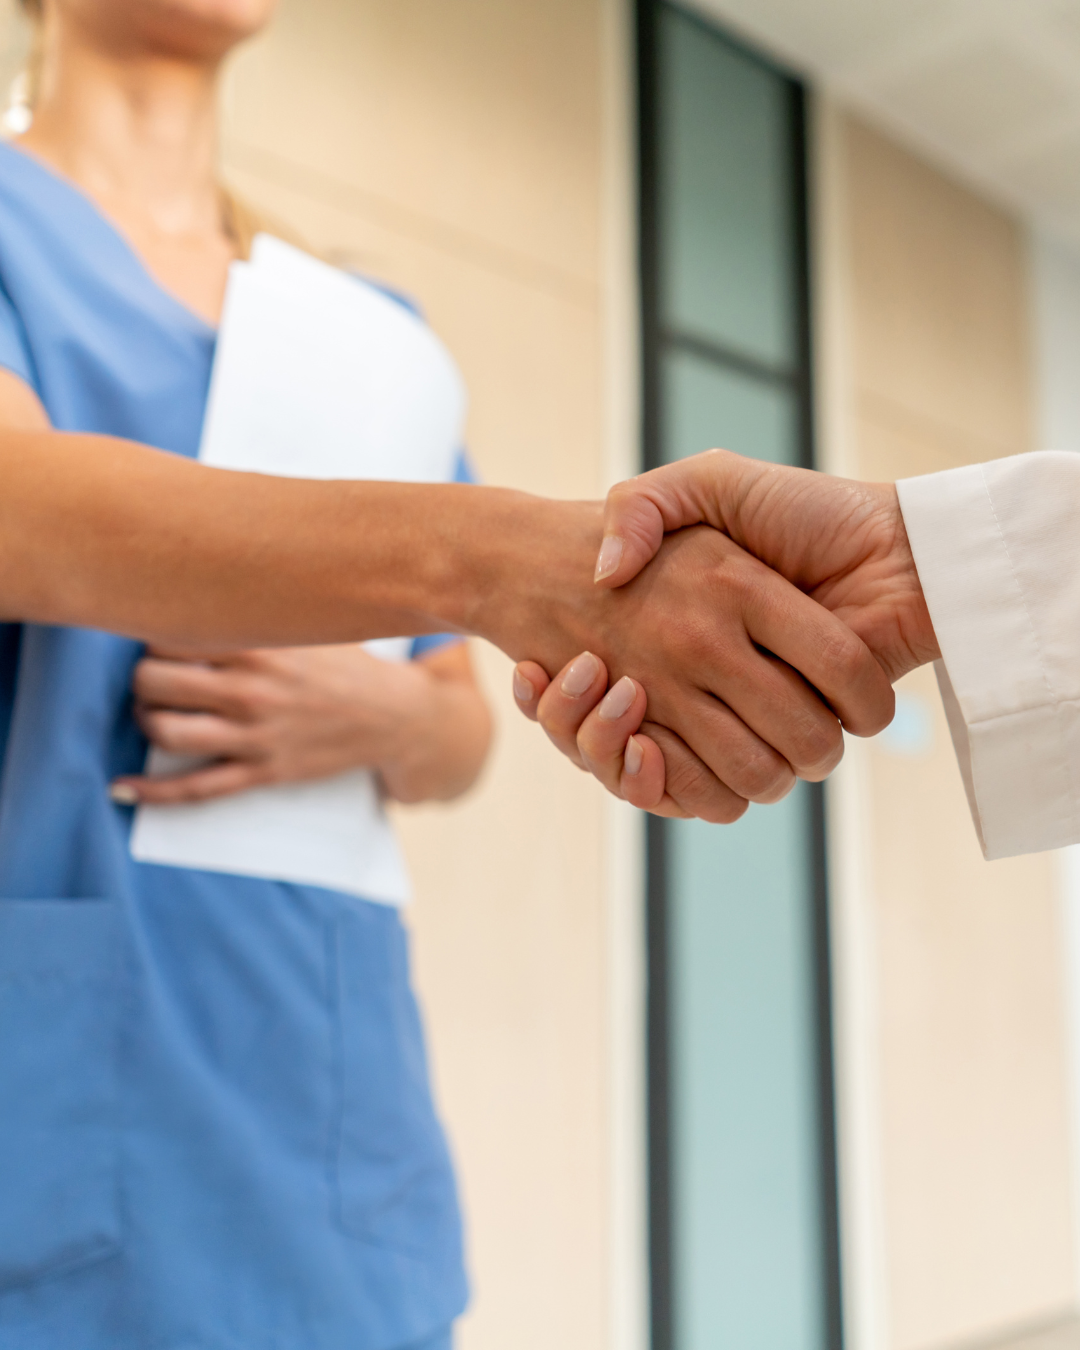 Two clinical staff members shake hands